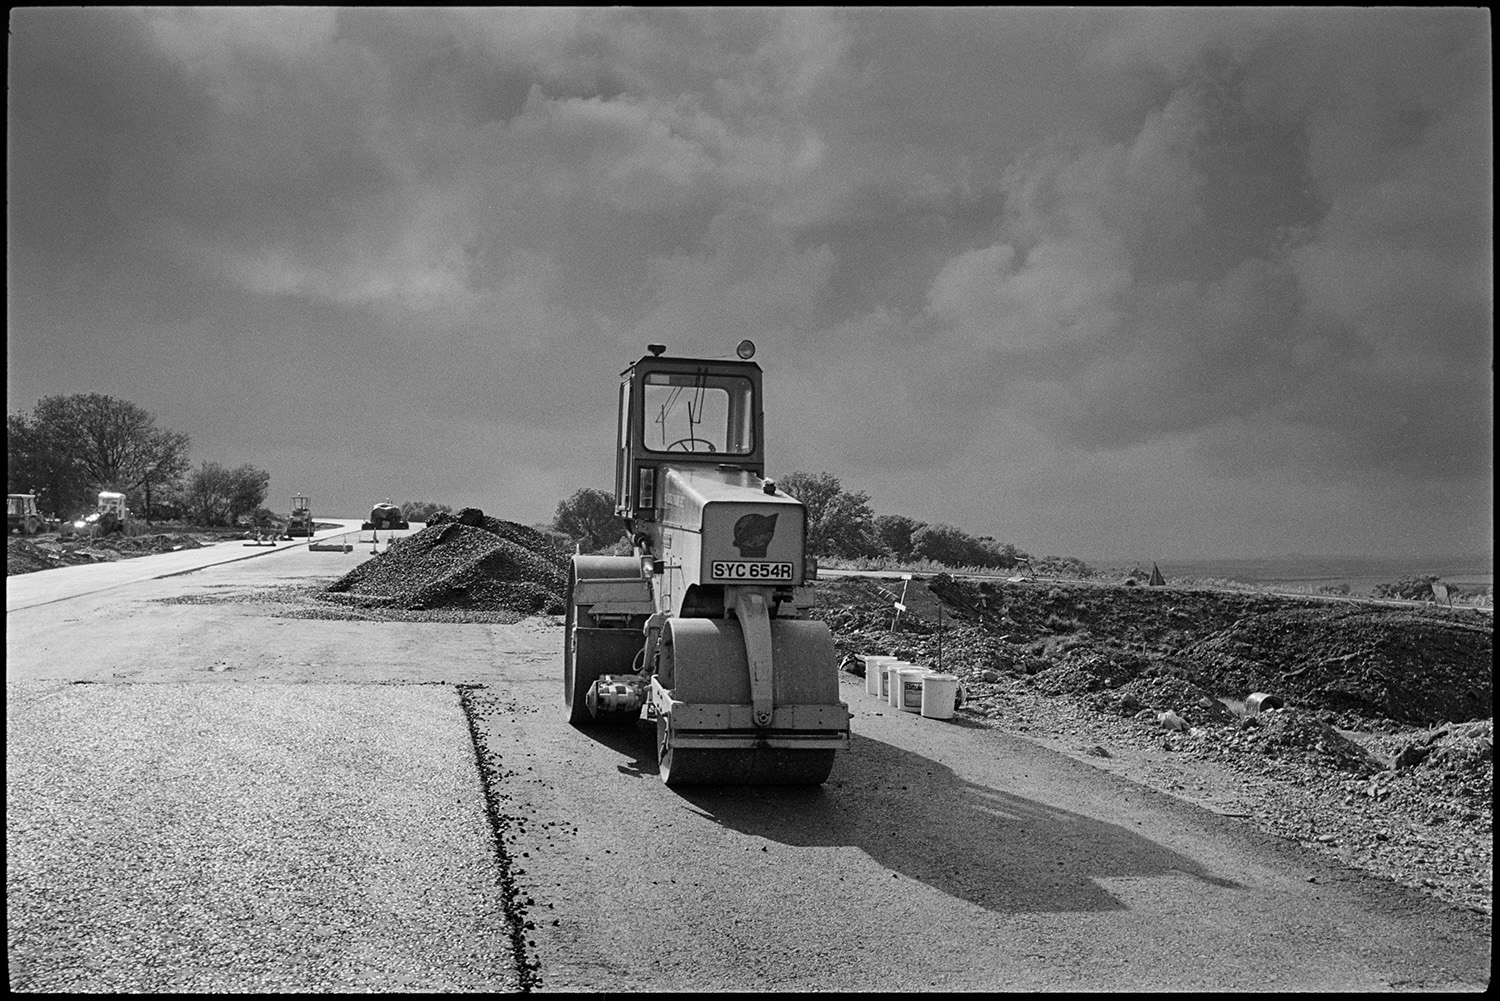 Machinery on new motorway link road shortly before it opened. Diesel roller and earth mover.
[A diesel roller working on the North Devon link road near Rackenford shortly before it opened. Other machinery, piles of gravel and buckets are visible on the road. A stormy sky is in the background.]